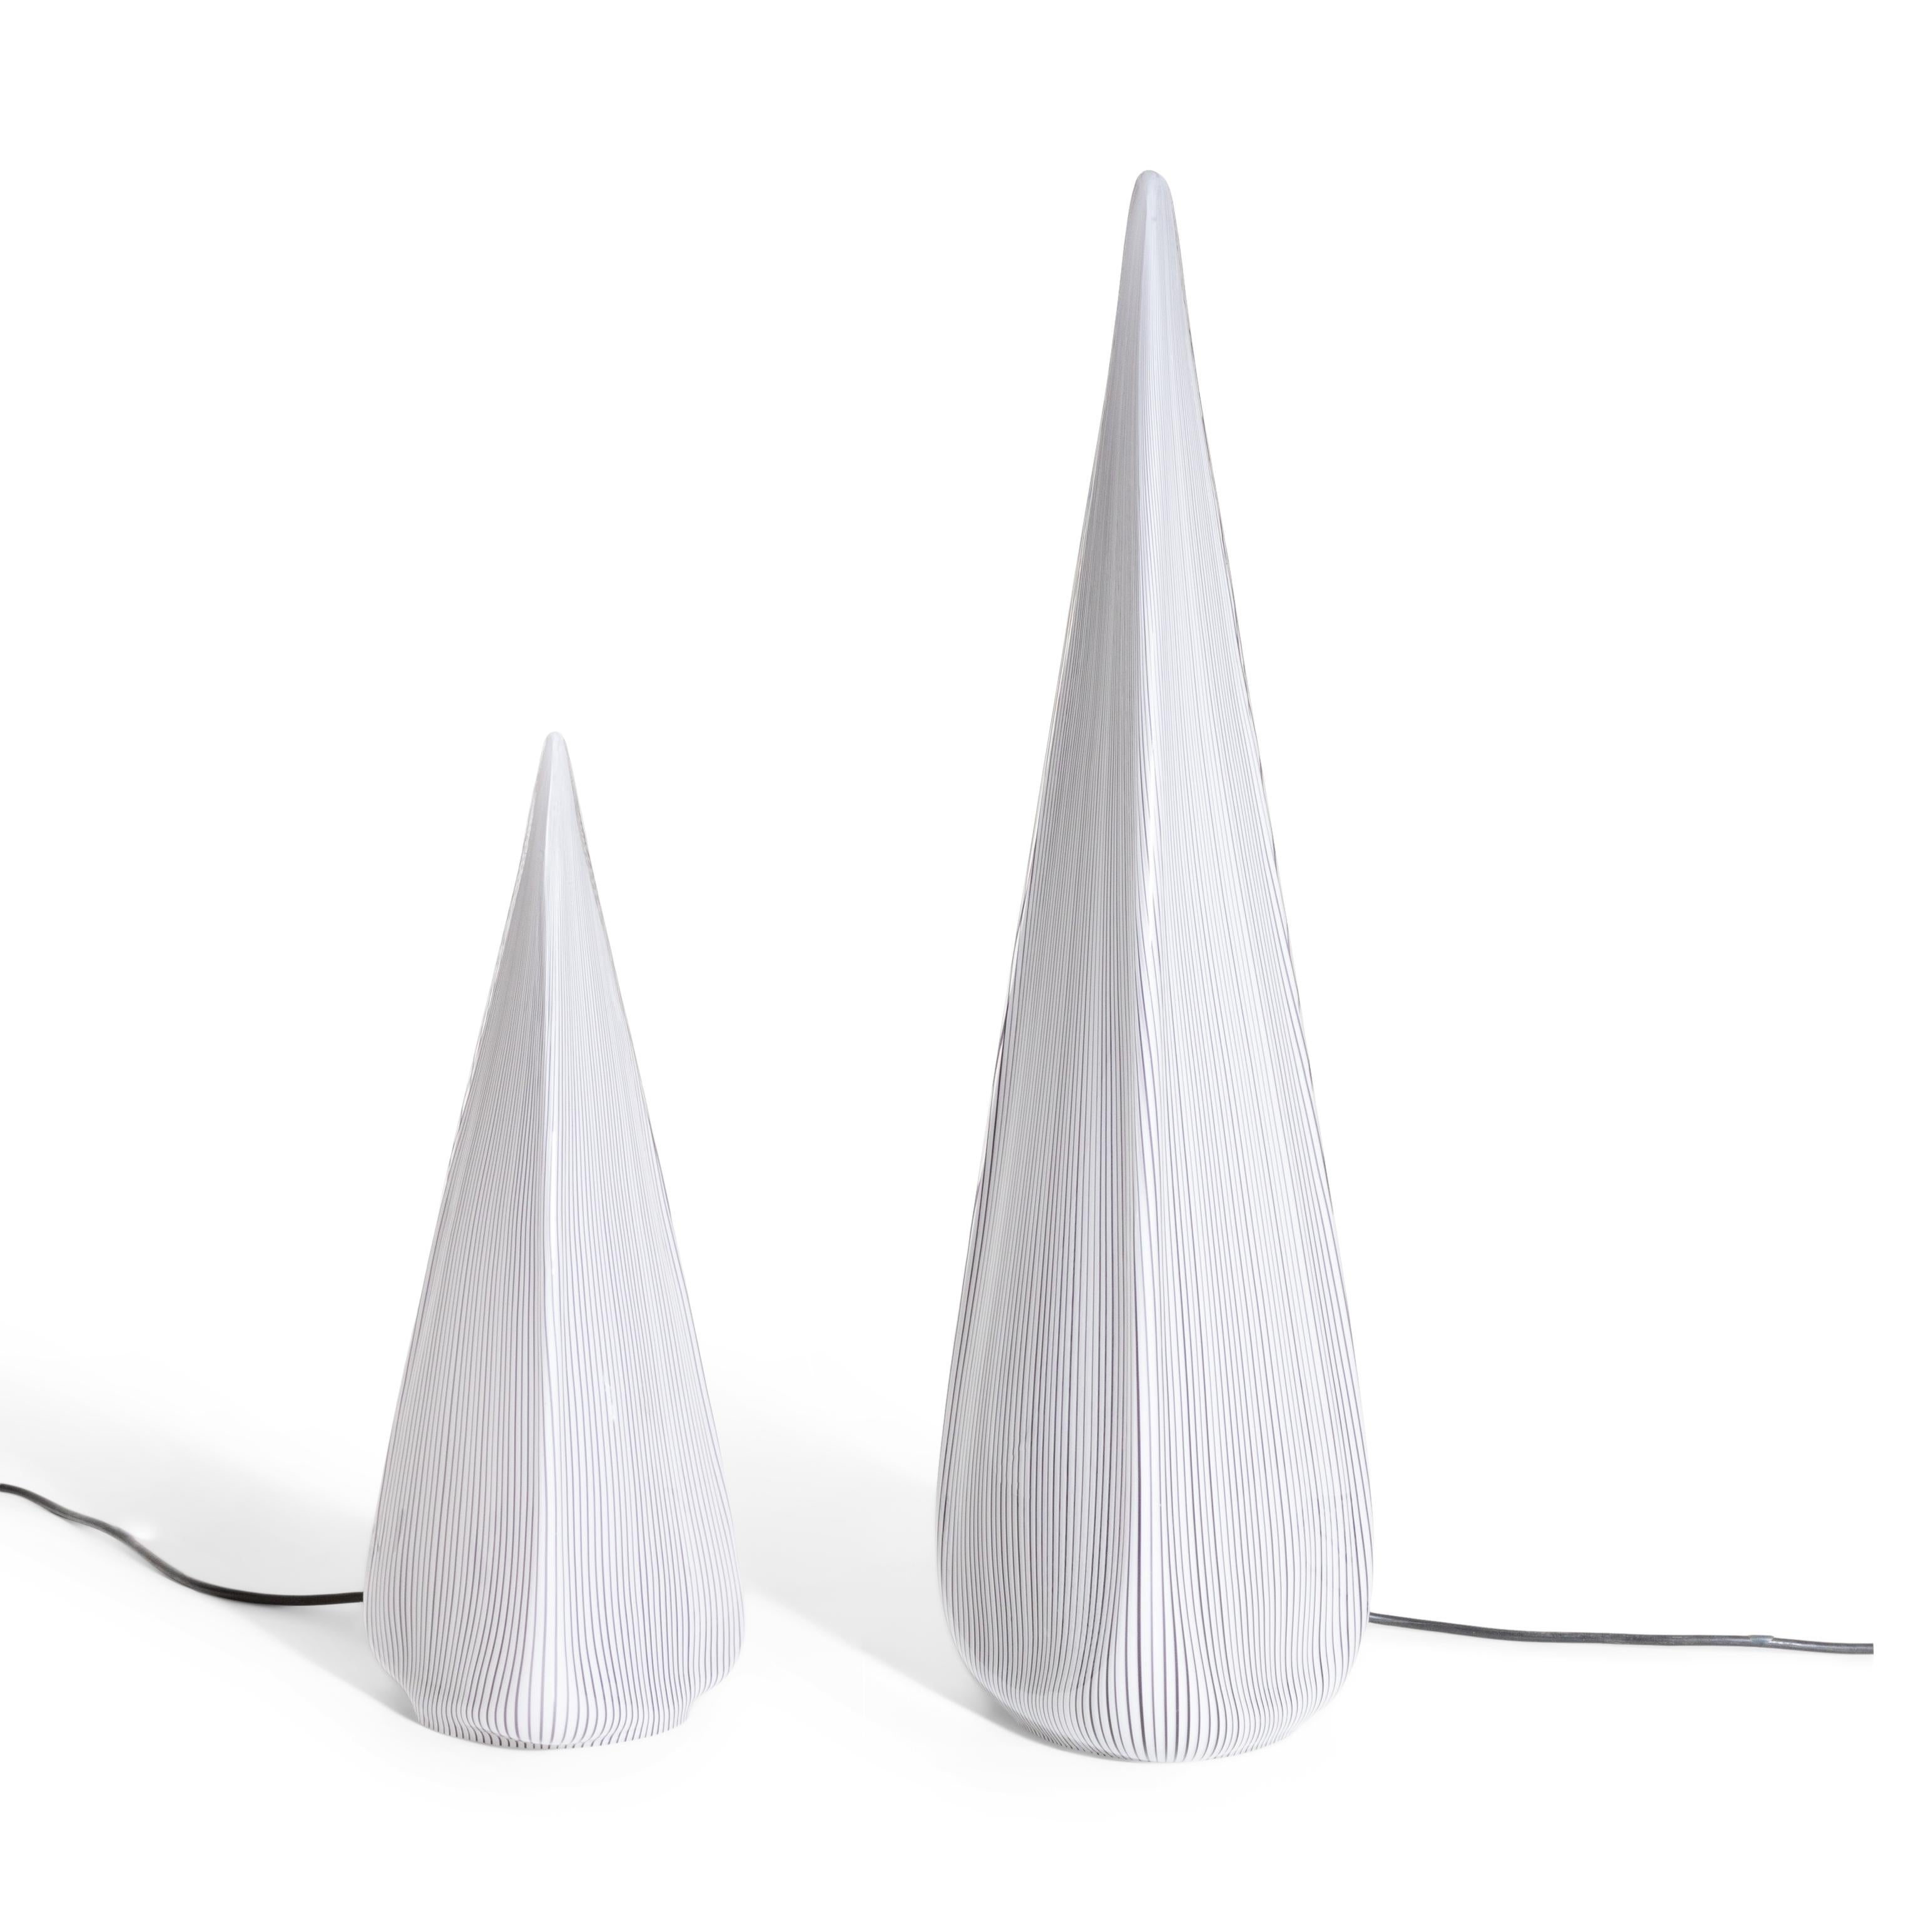 A pair of tear drop shaped Italian Art glass table lamps.
One Edison base light socket inside each glass casing, 
with gray and white vertical stripe pattern.

Dimensions Tall lamp H 28 ½, W 8¼, D 7, short lamp H 18¼, W 7¼, D 6 inches.

